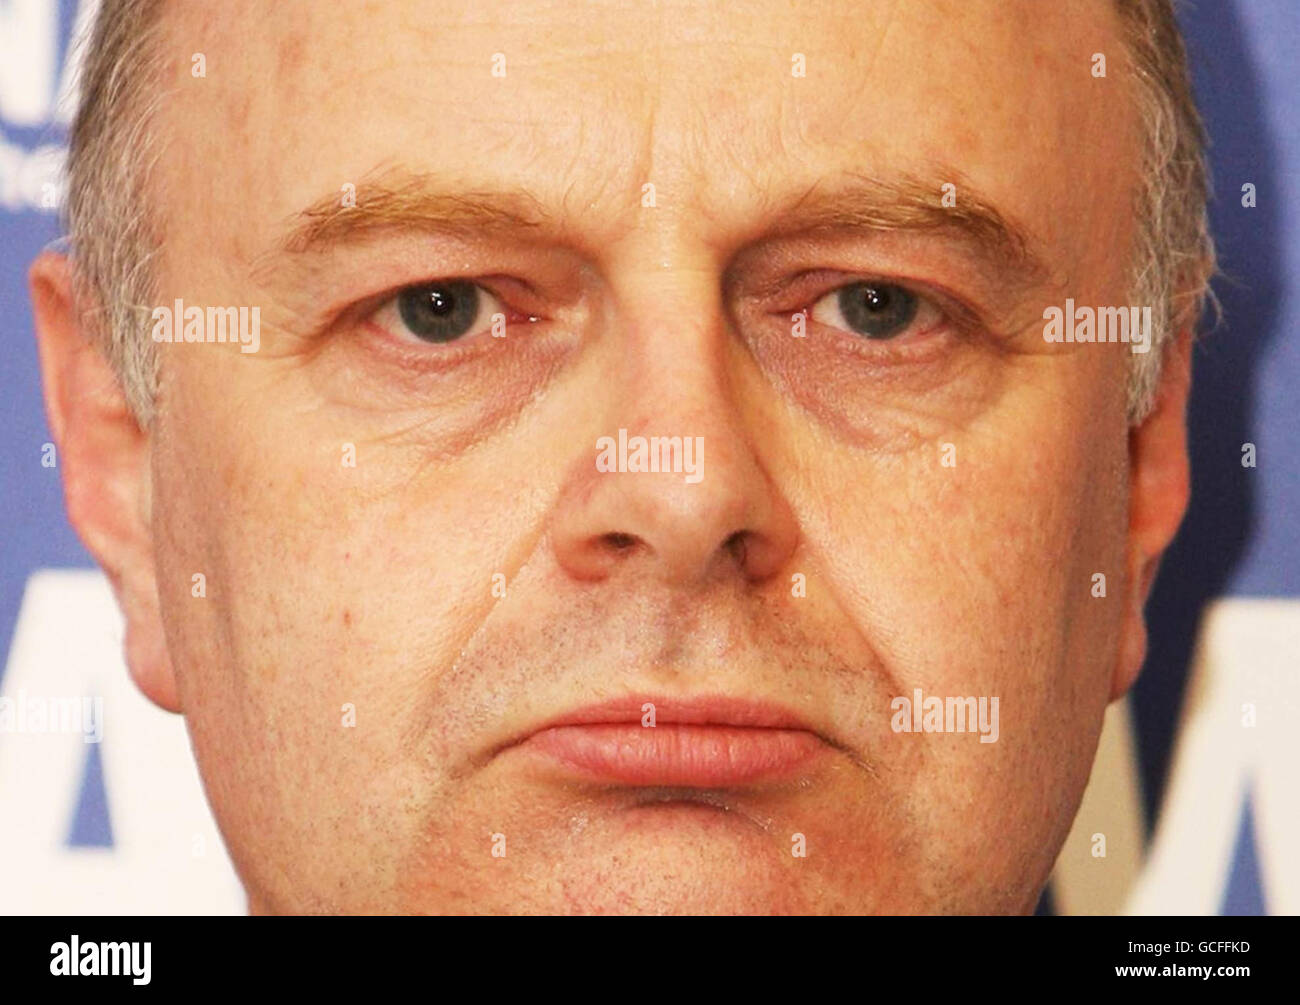 ALTERNATE CROP. Peter Harvey, 50, attends a press conference at City Gate East, Tollhouse Hill, Nottingham after being cleared of attempted murder and causing grevious bodily harm with intent on a pupil. Stock Photo